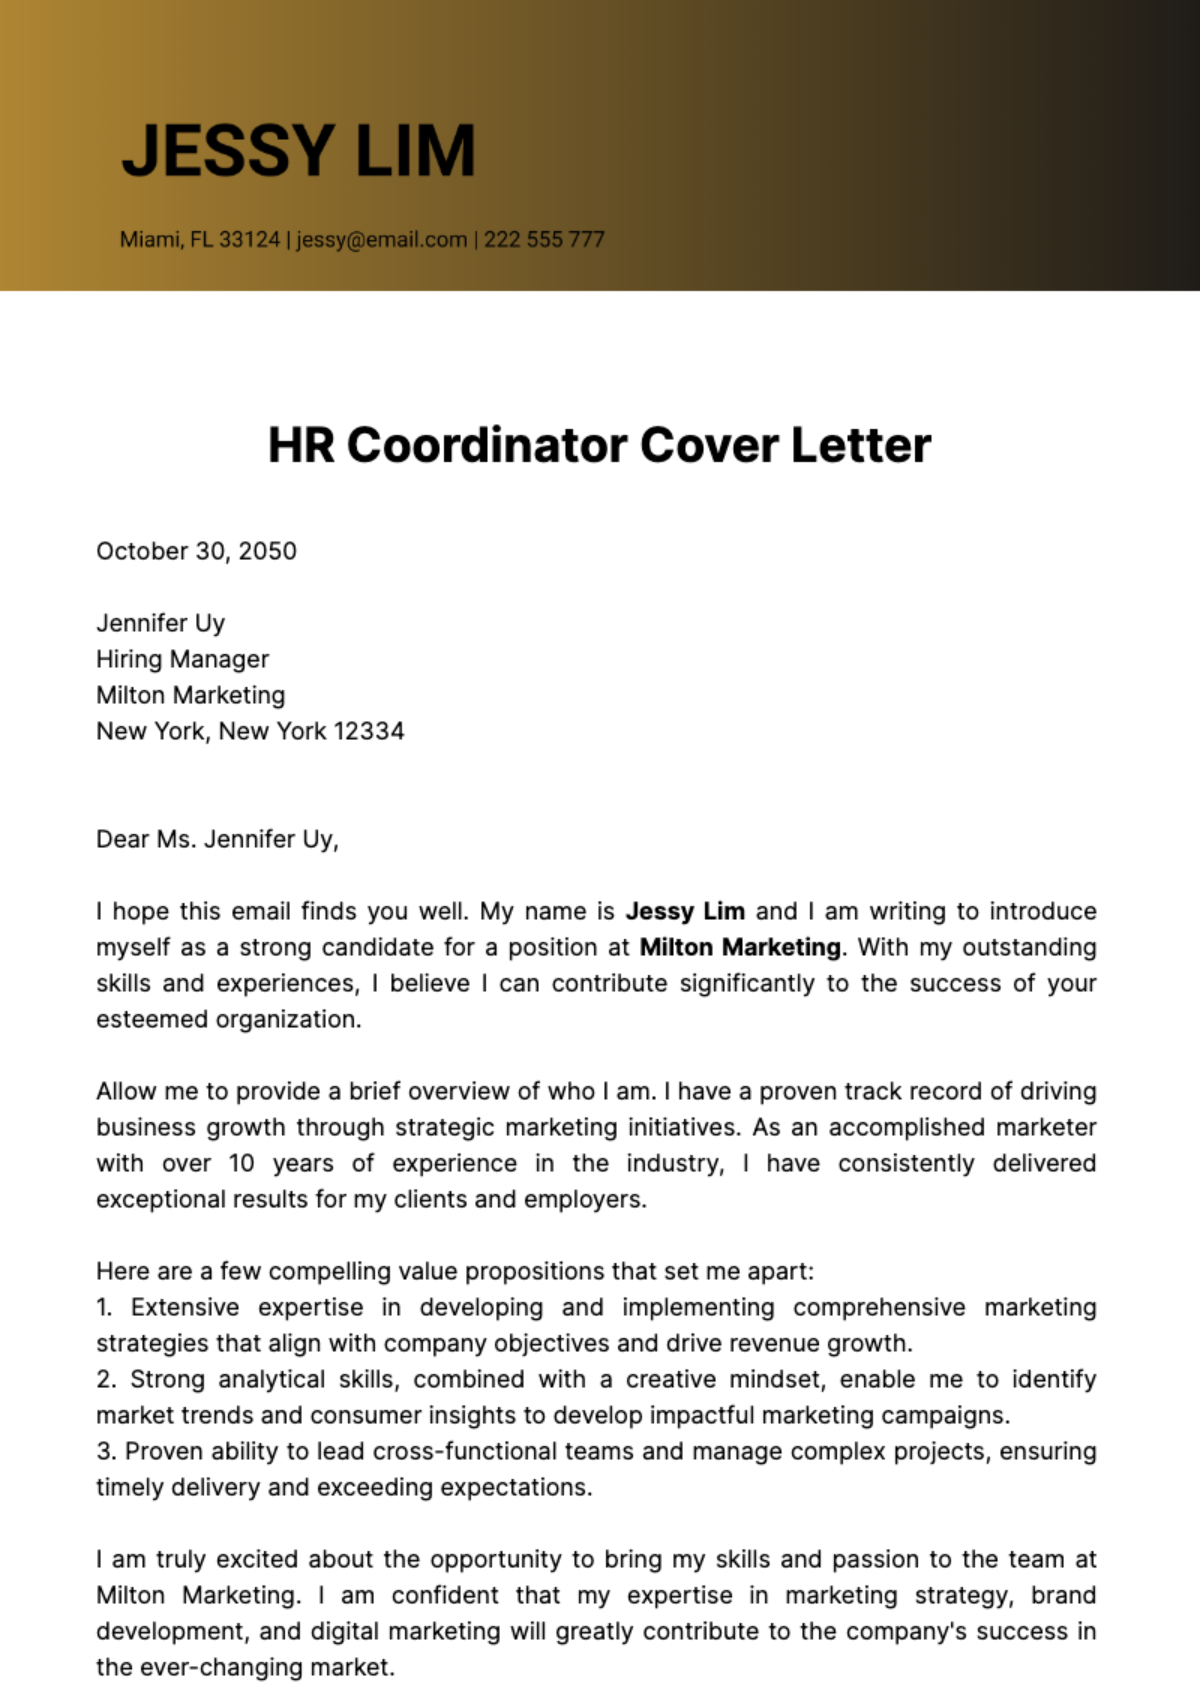 Free HR Coordinator Cover Letter  Template